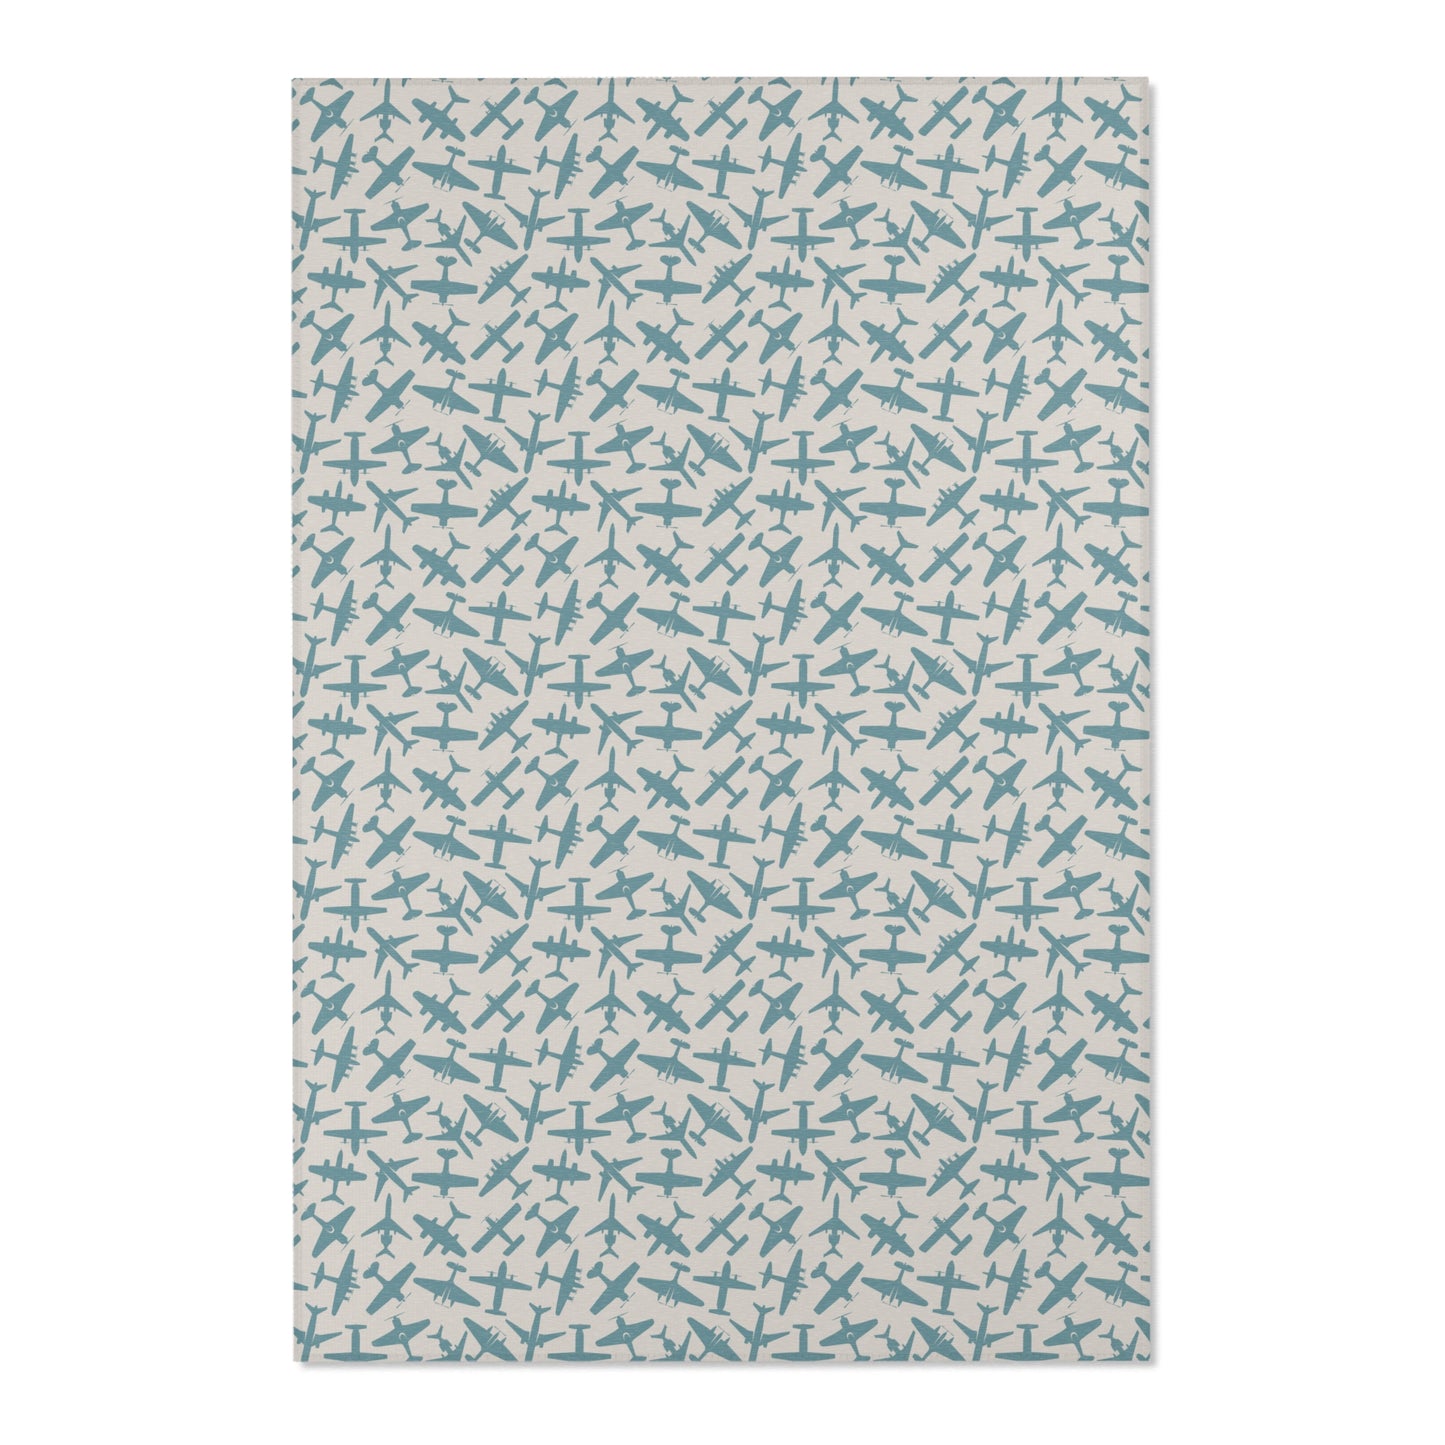 aviation merchandise, airplane patterned aviation area rug 2